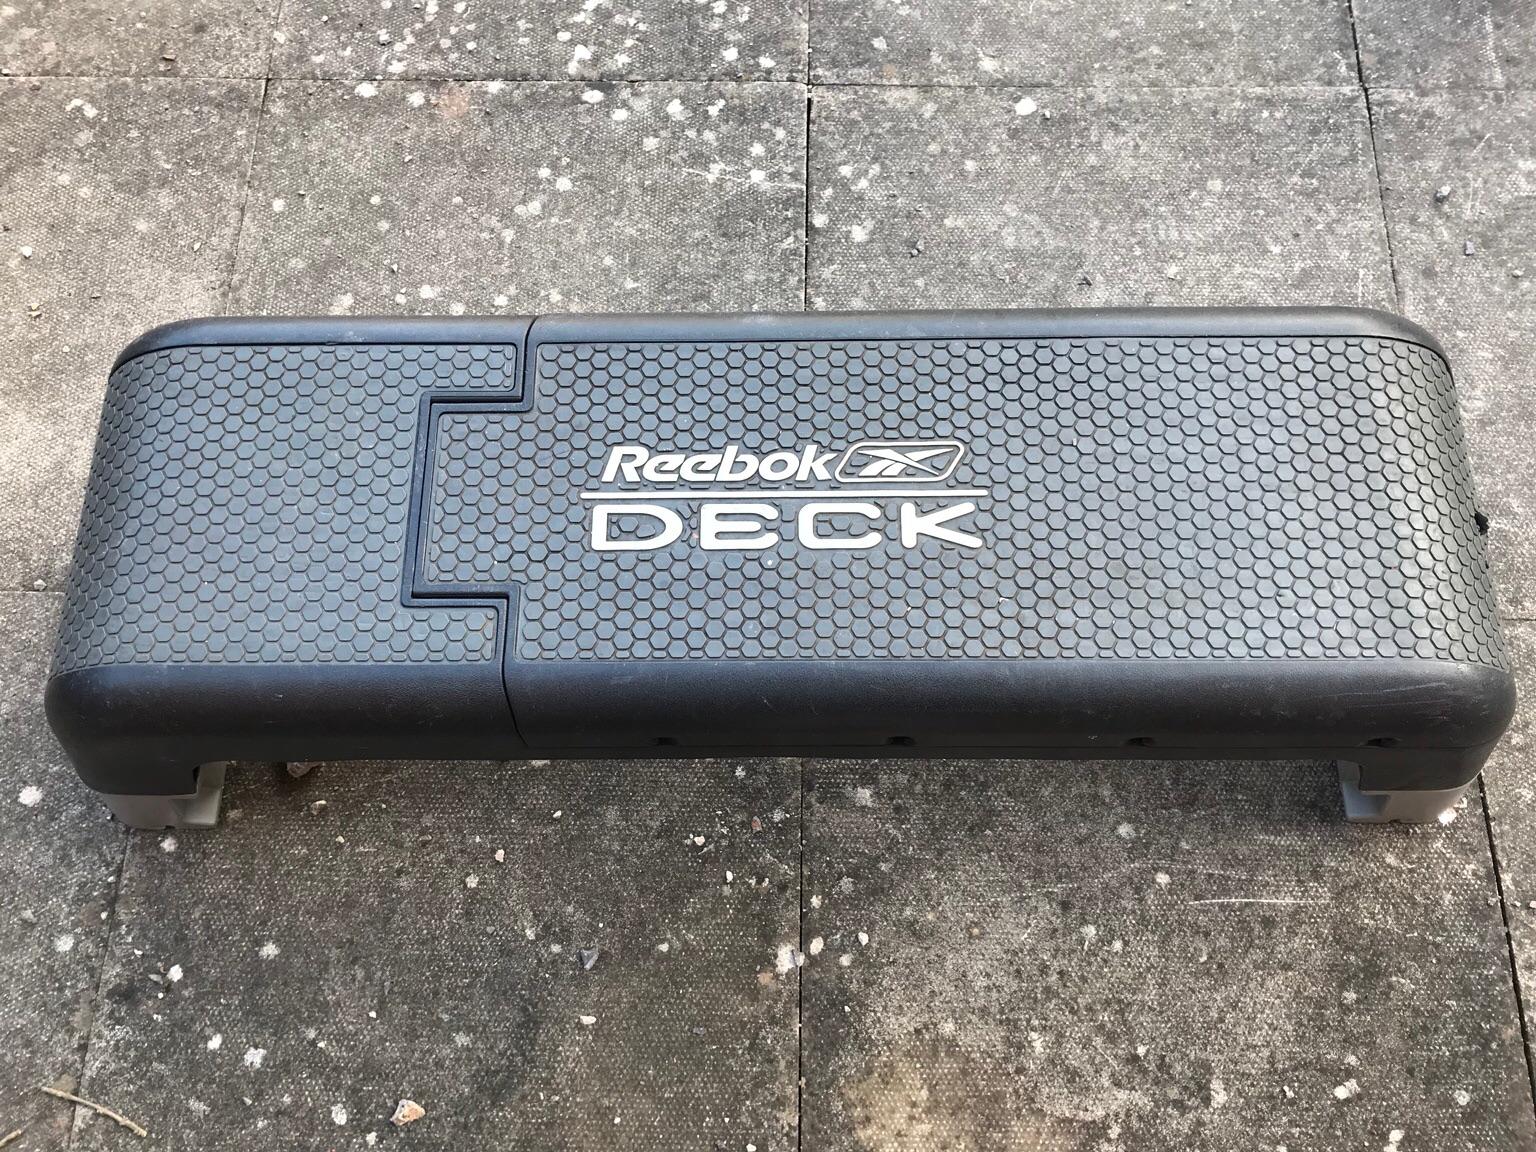 used reebok deck for sale